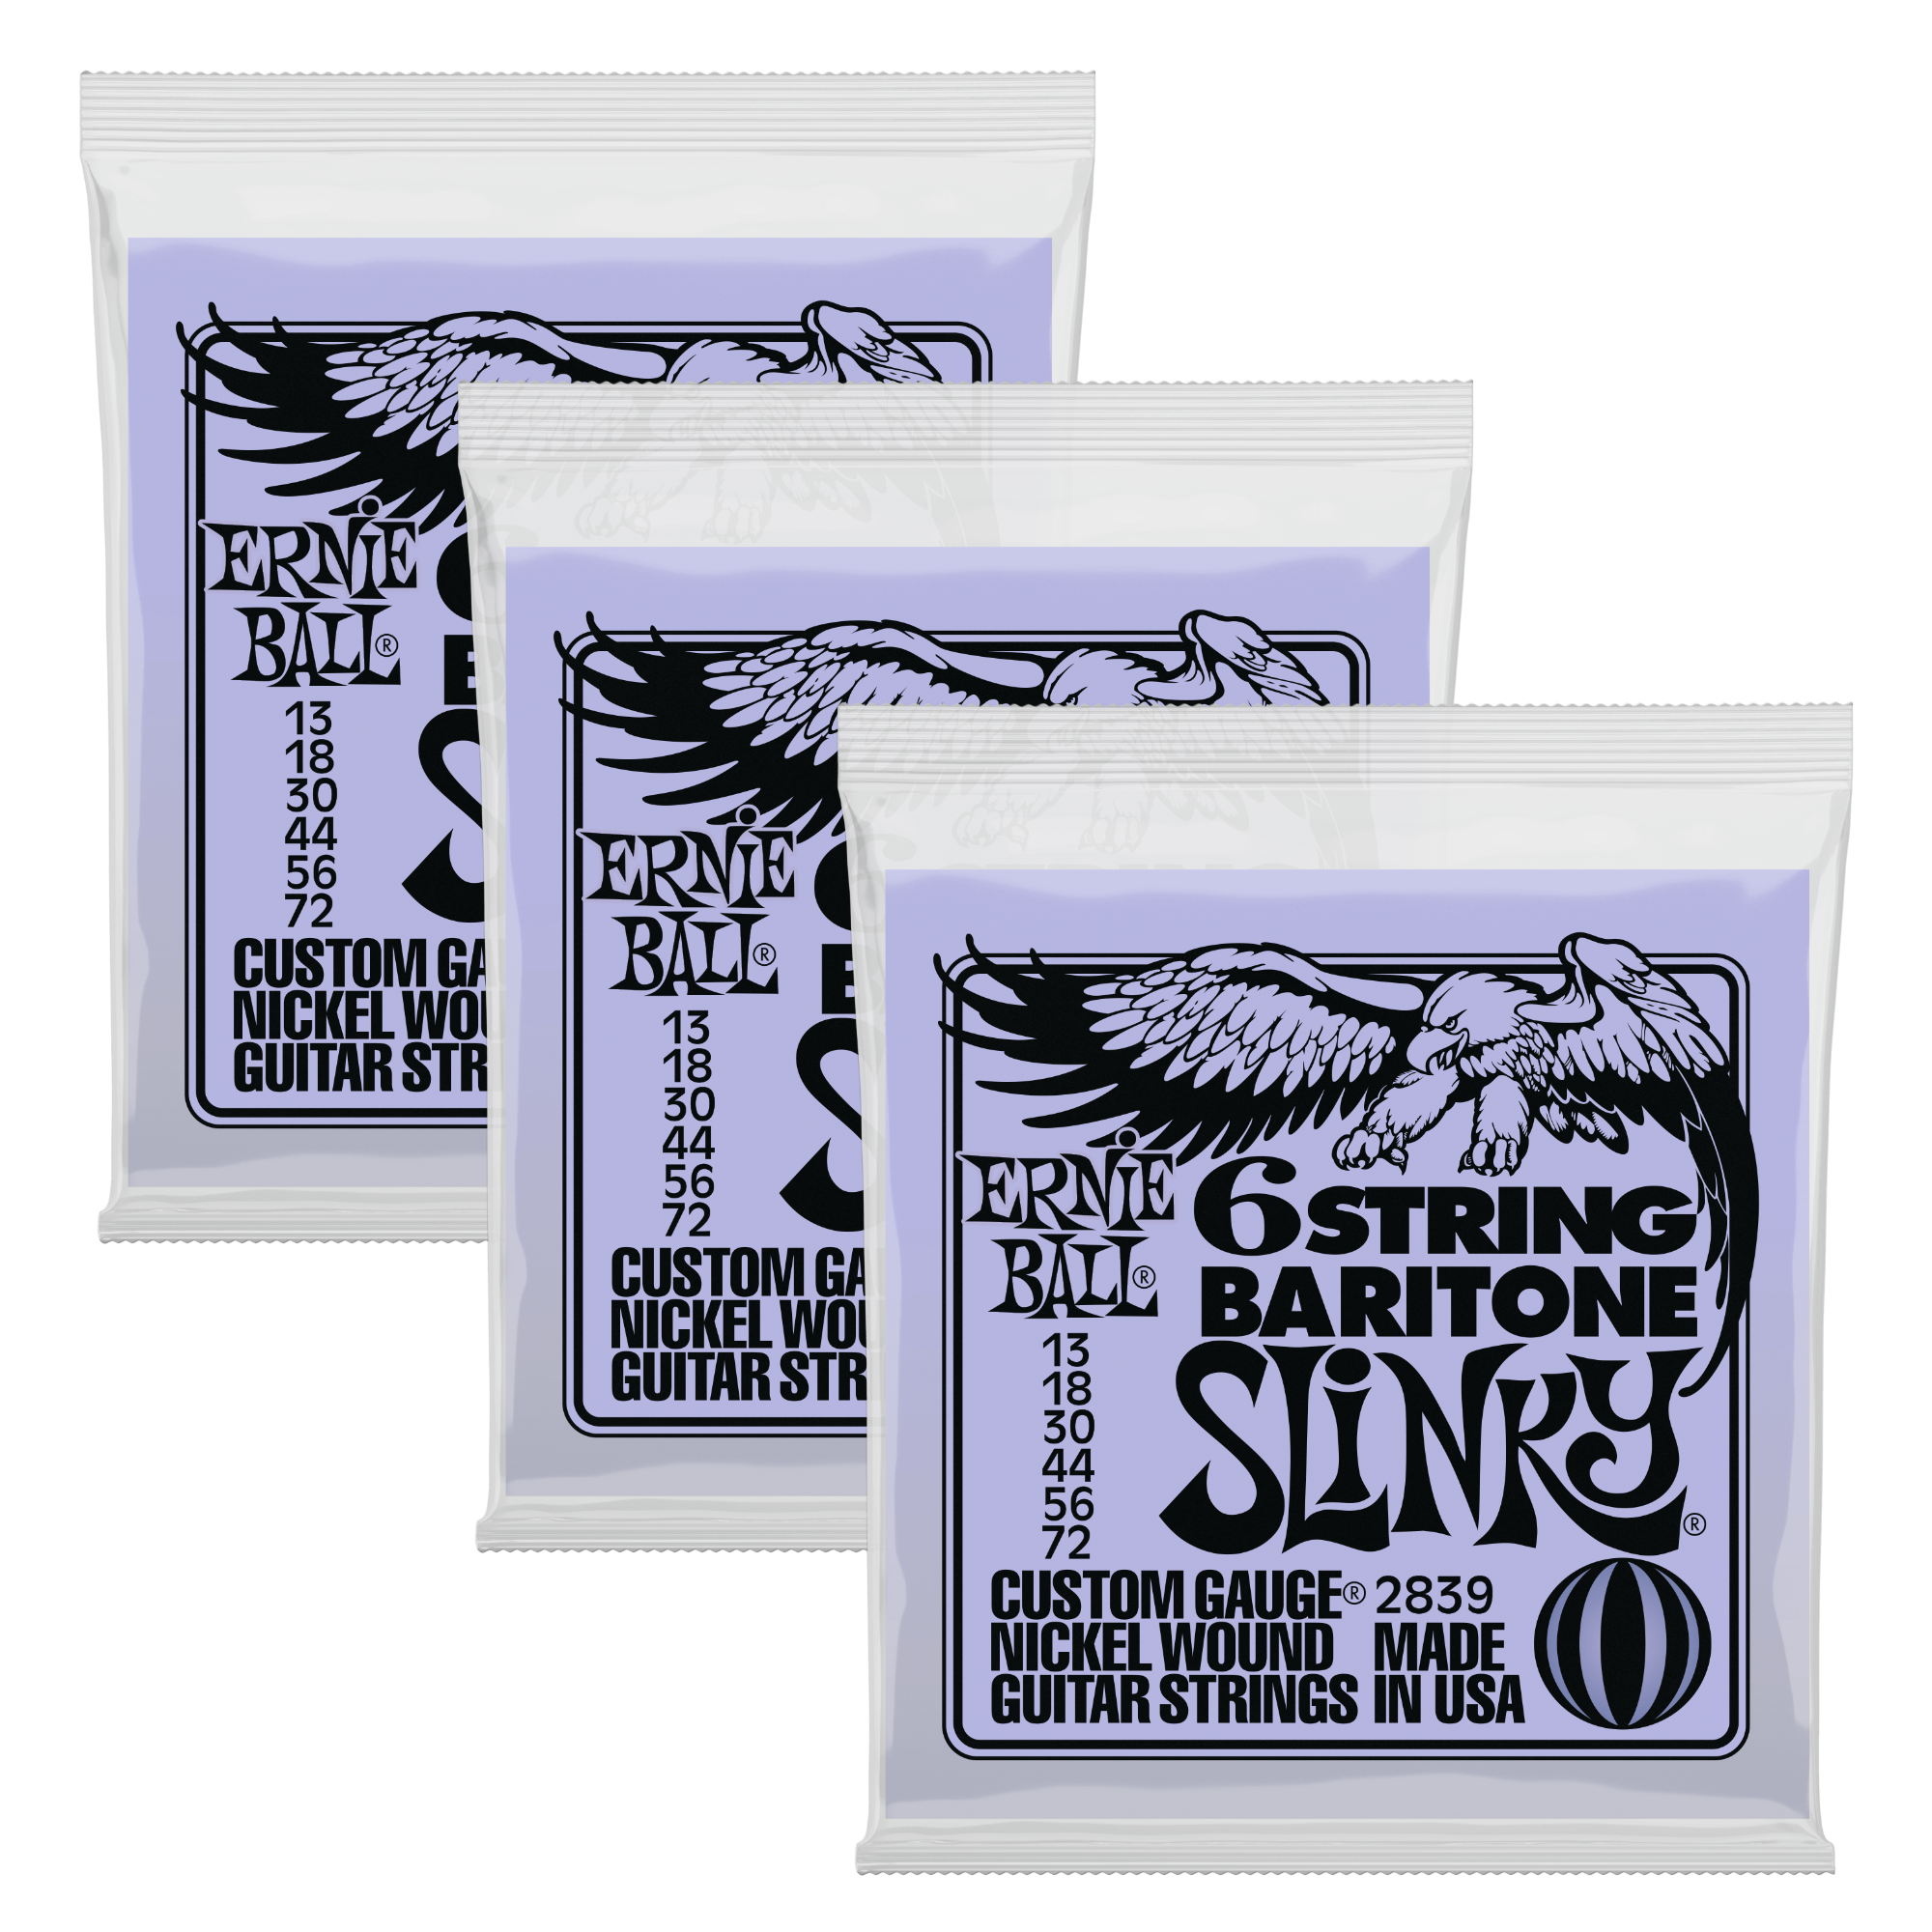 3x (3 sets) Ernie Ball Slinky 6-String with Small Ball End 29 5/8 Scale Baritone Strings (13-72)